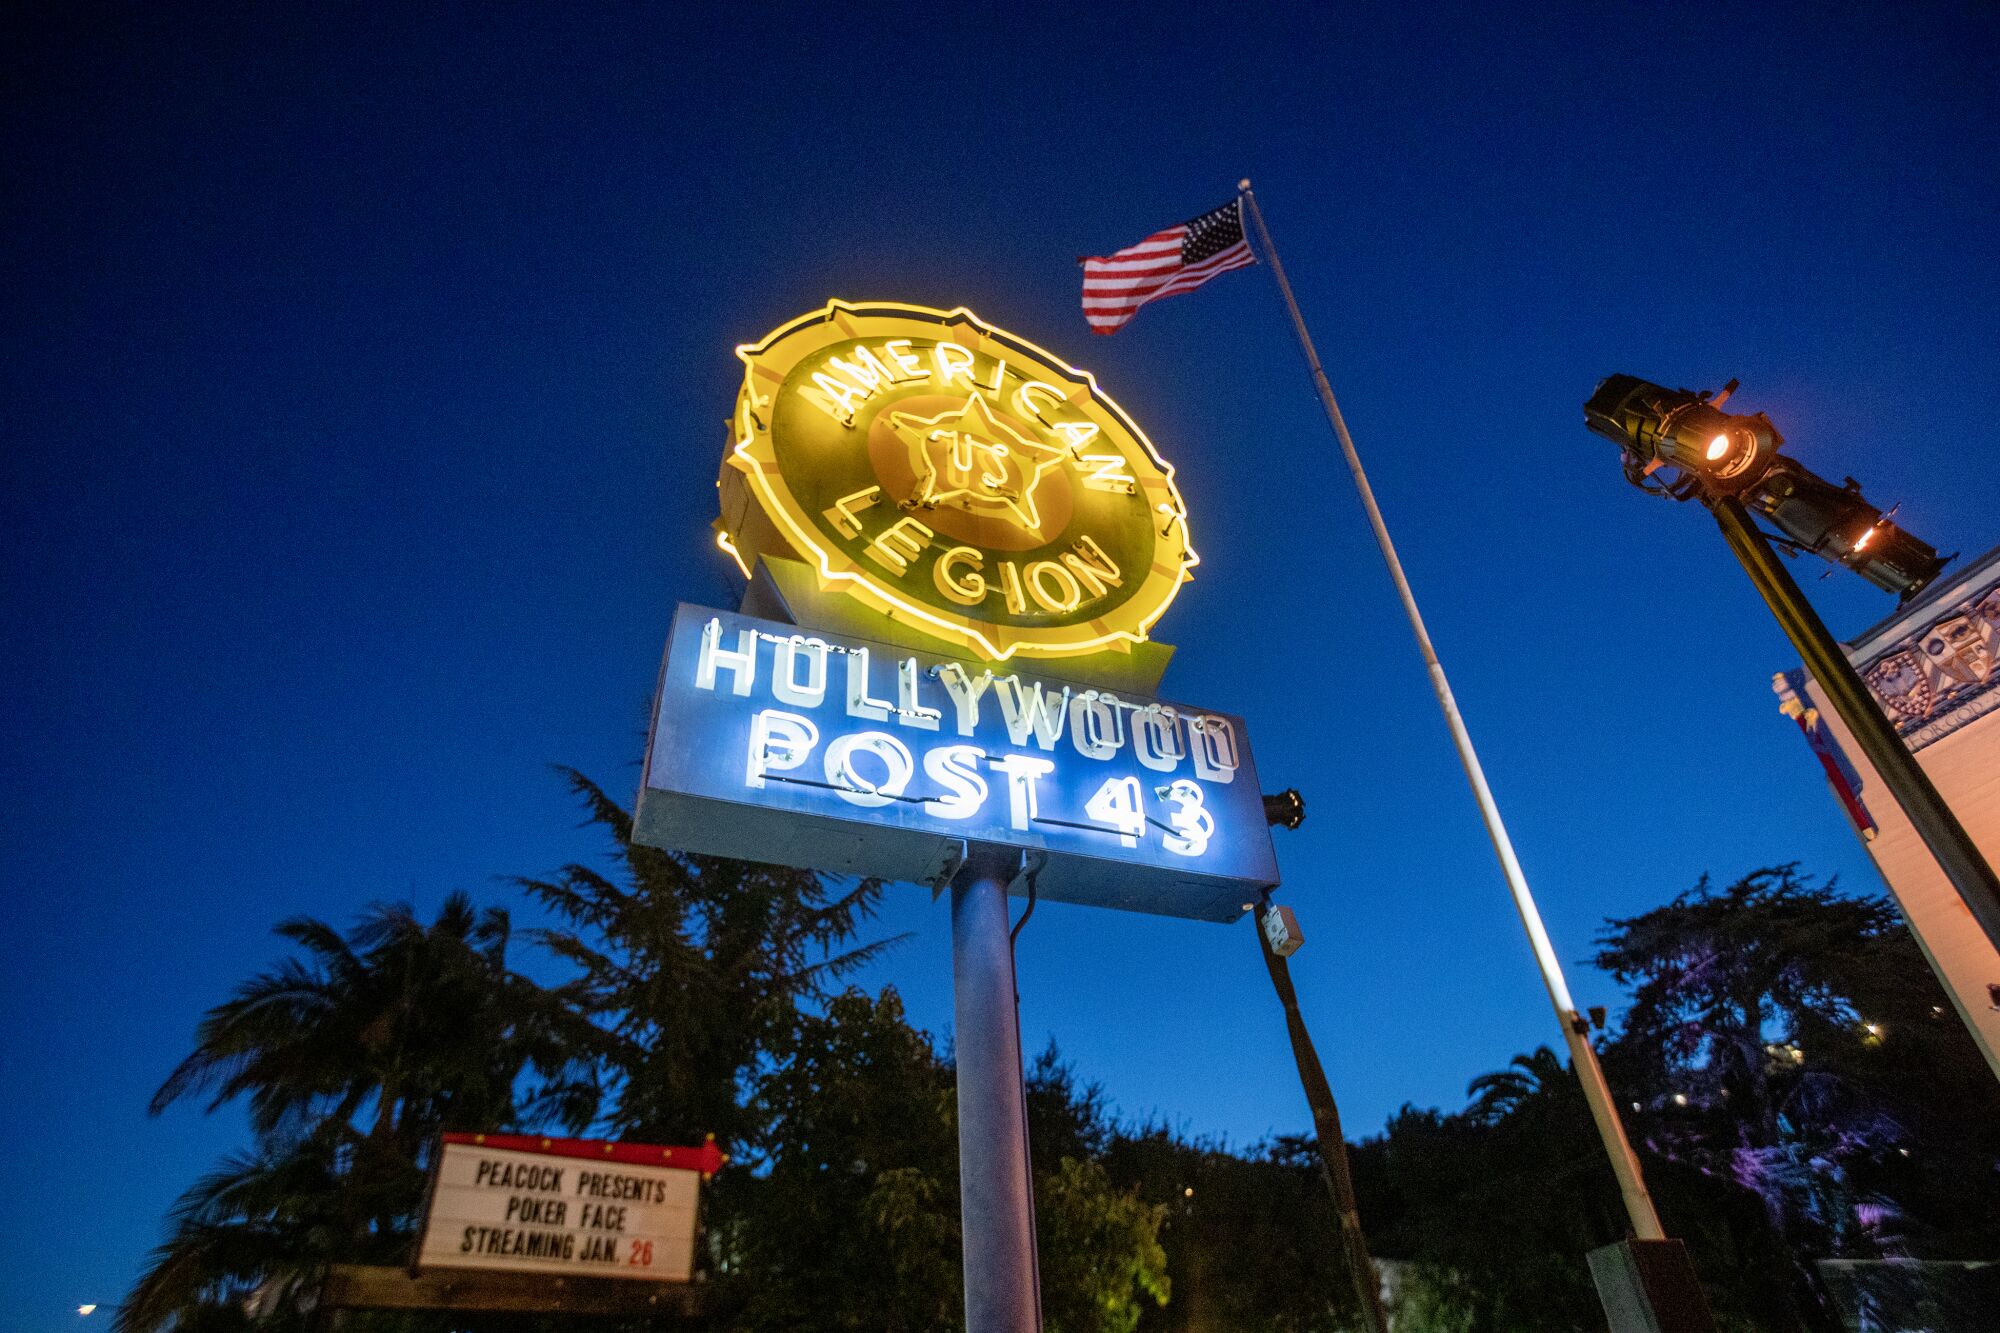 Neon sign reads "American Legion Hollywood Post 43" while a smaller sign says "Peacock presents Poker Face streaming Jan. 26"